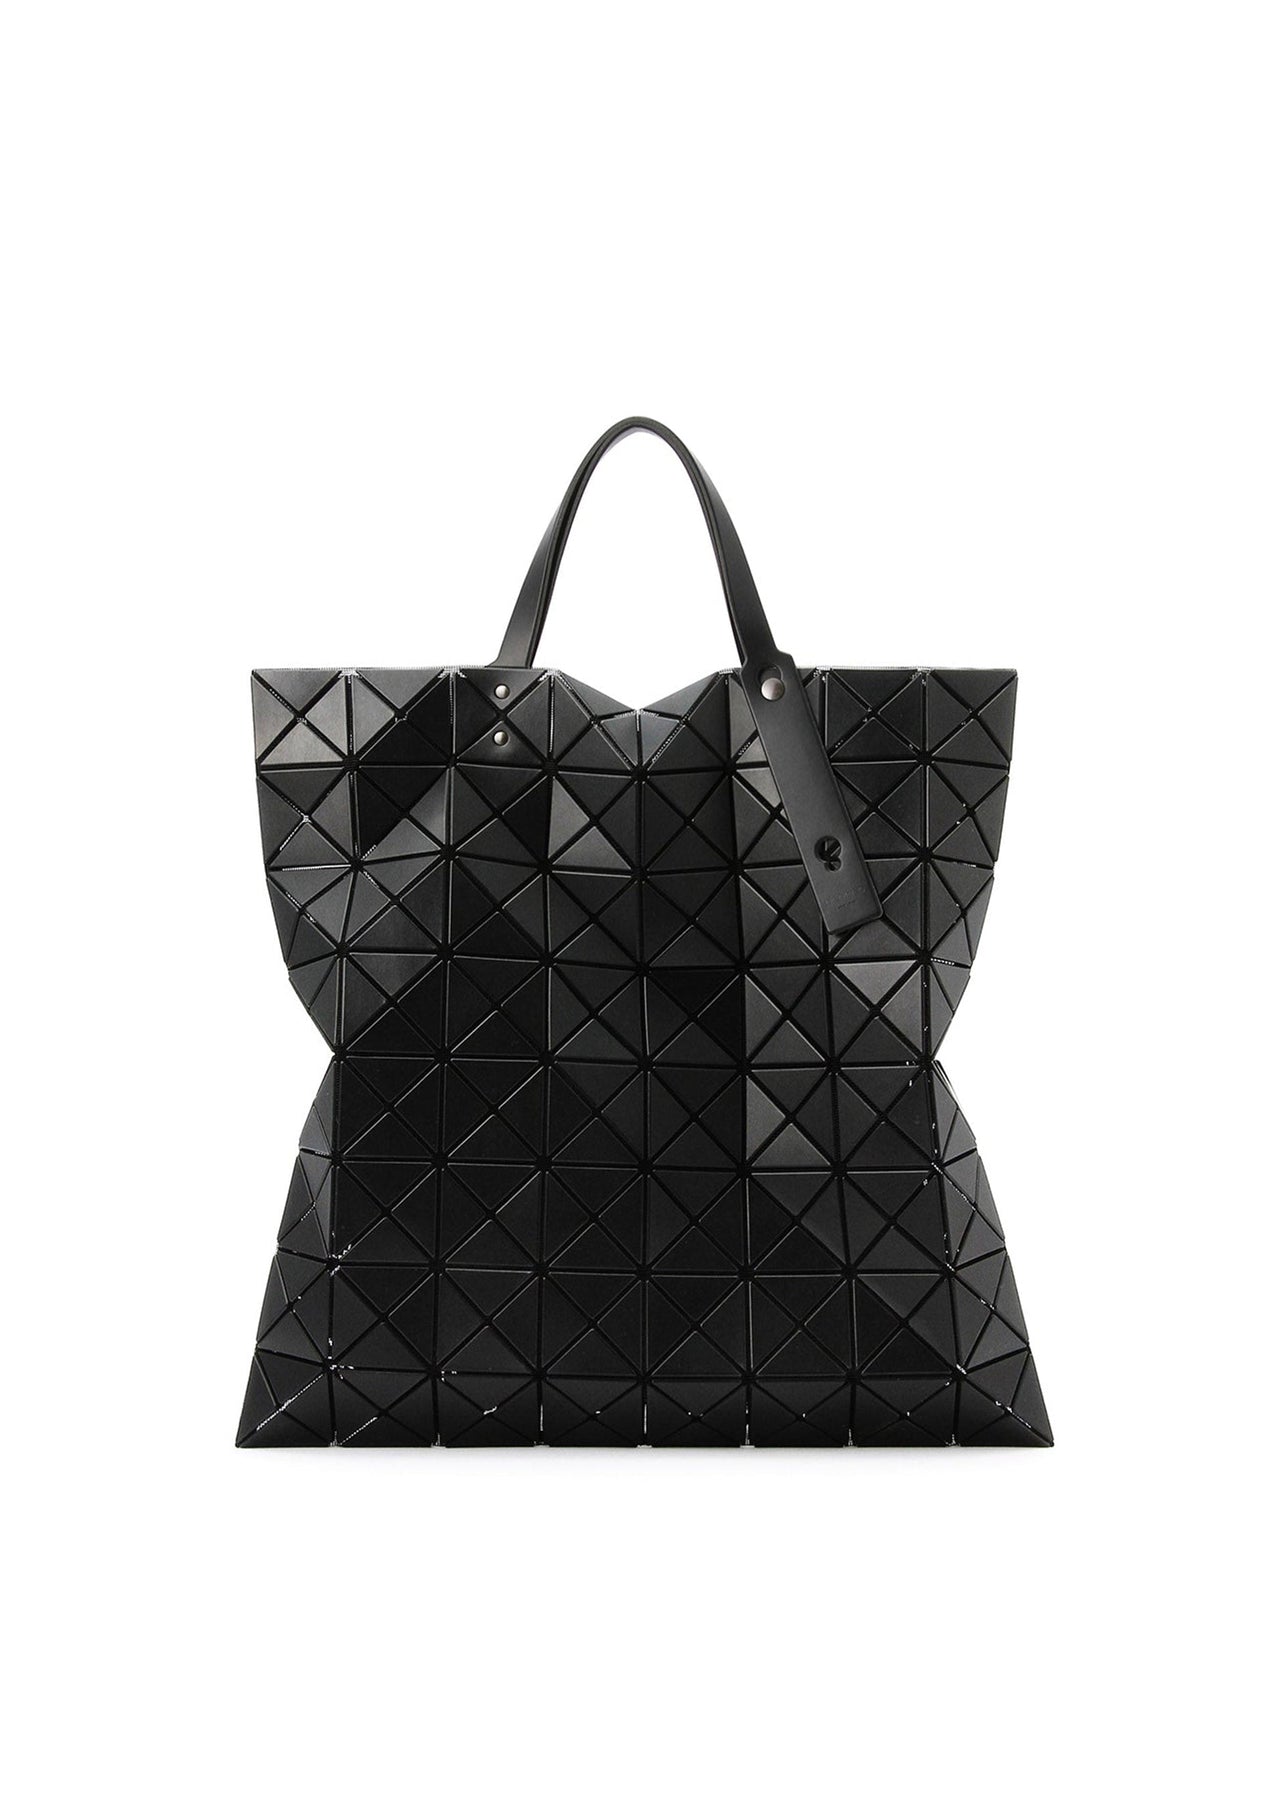 LUCENT MATTE TOTE BAG | The official ISSEY MIYAKE ONLINE STORE